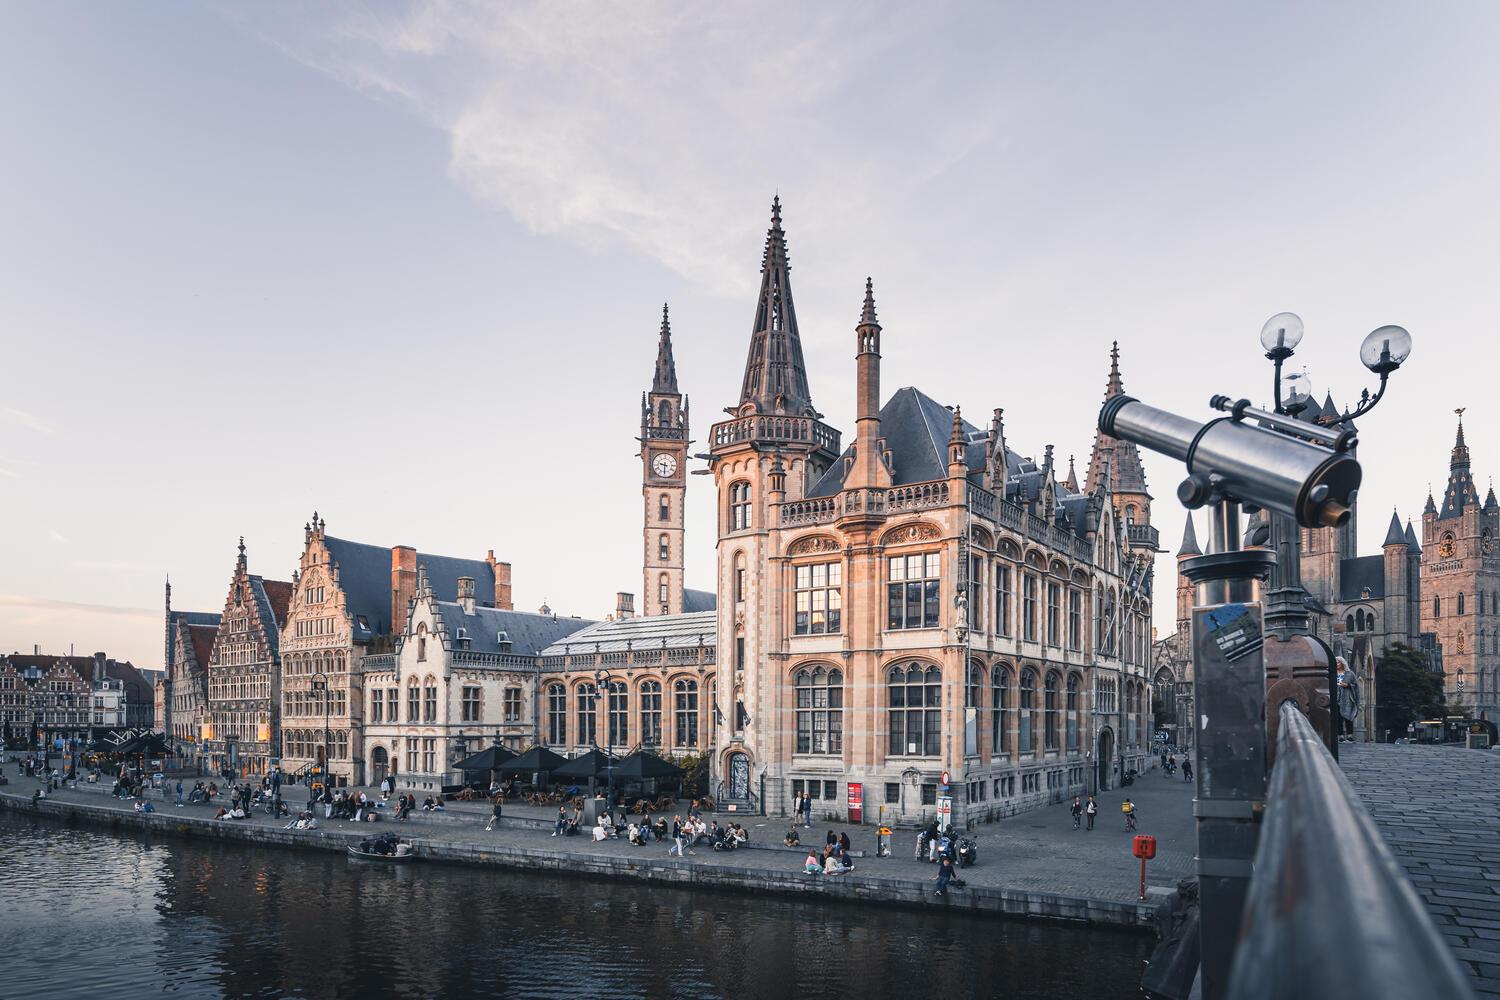 Ghent, more than a one night stay | Visit Gent